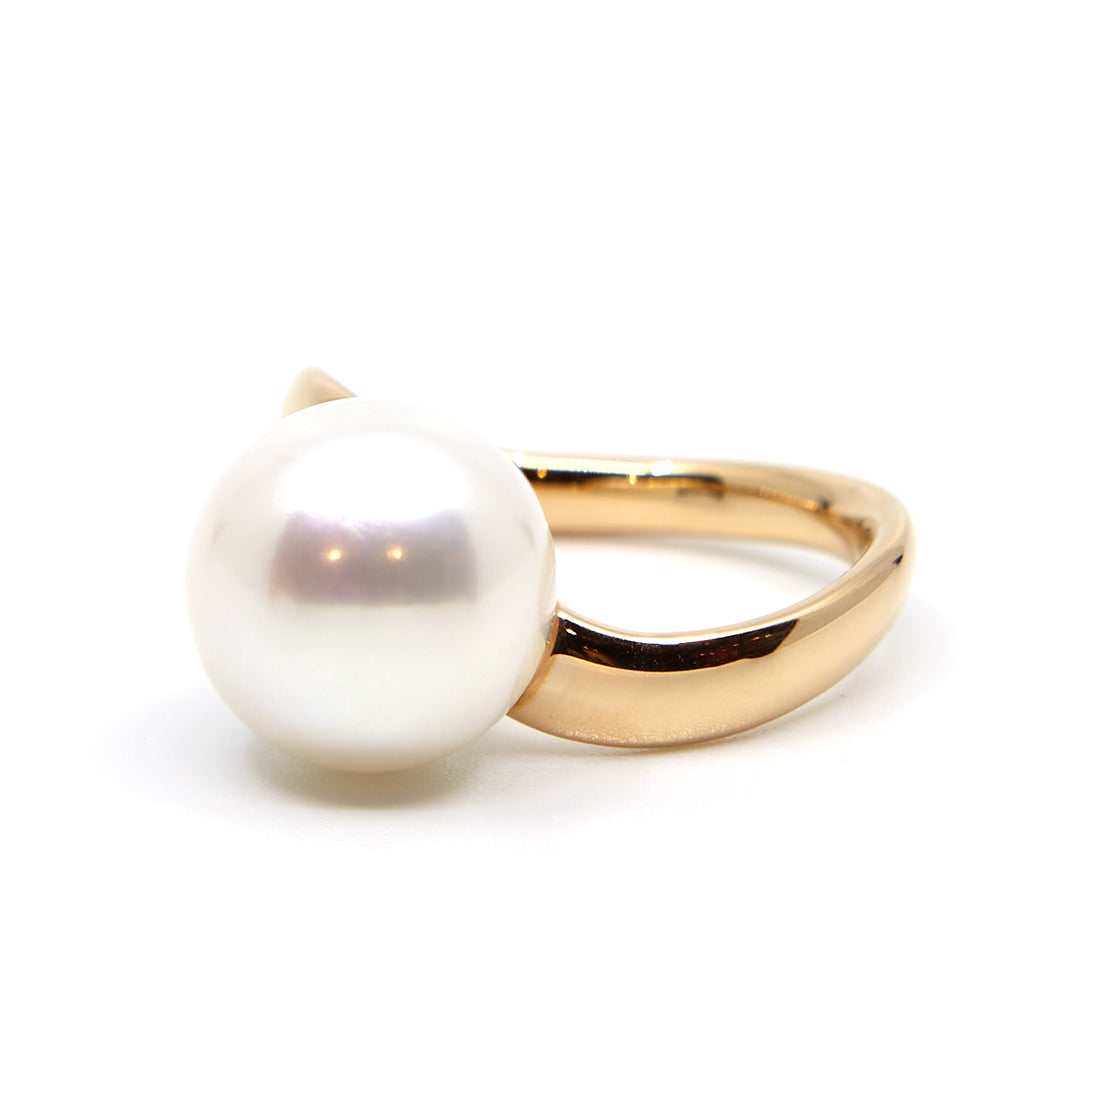 Rose gold ring with top quality pearl